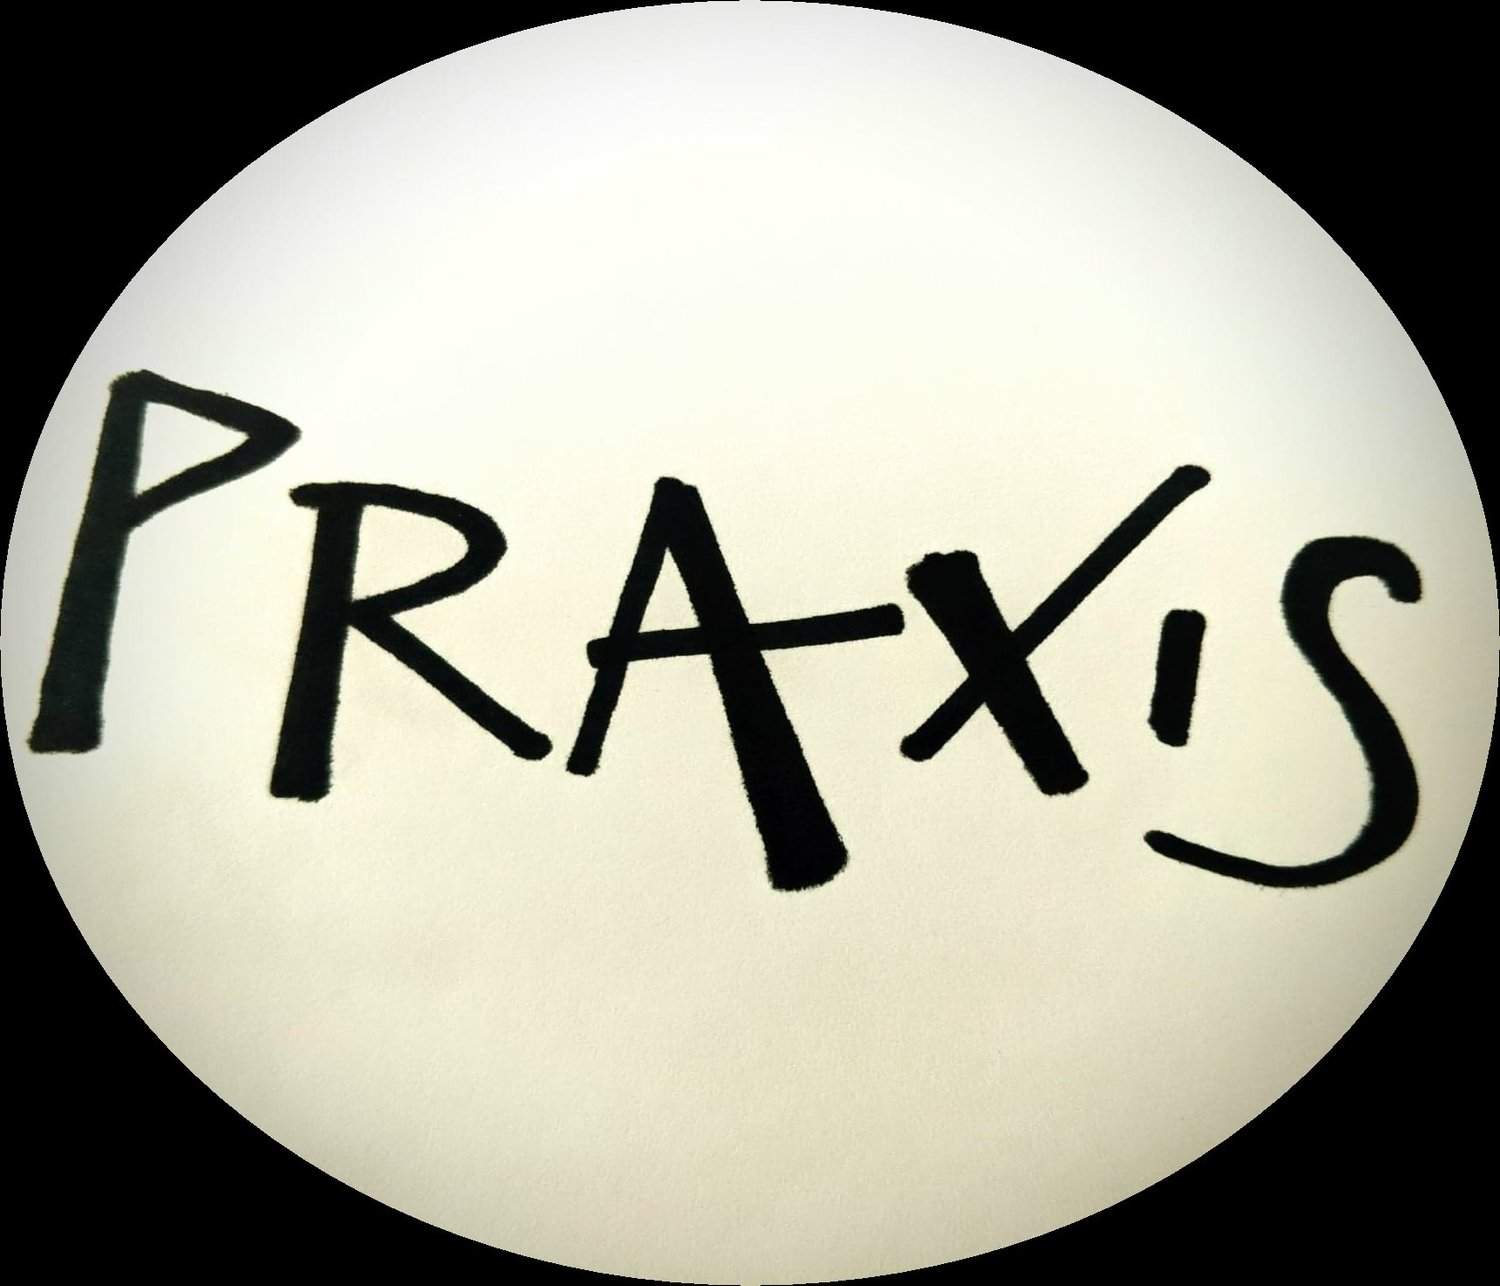 Praxis books, editing, poetry and publicity services